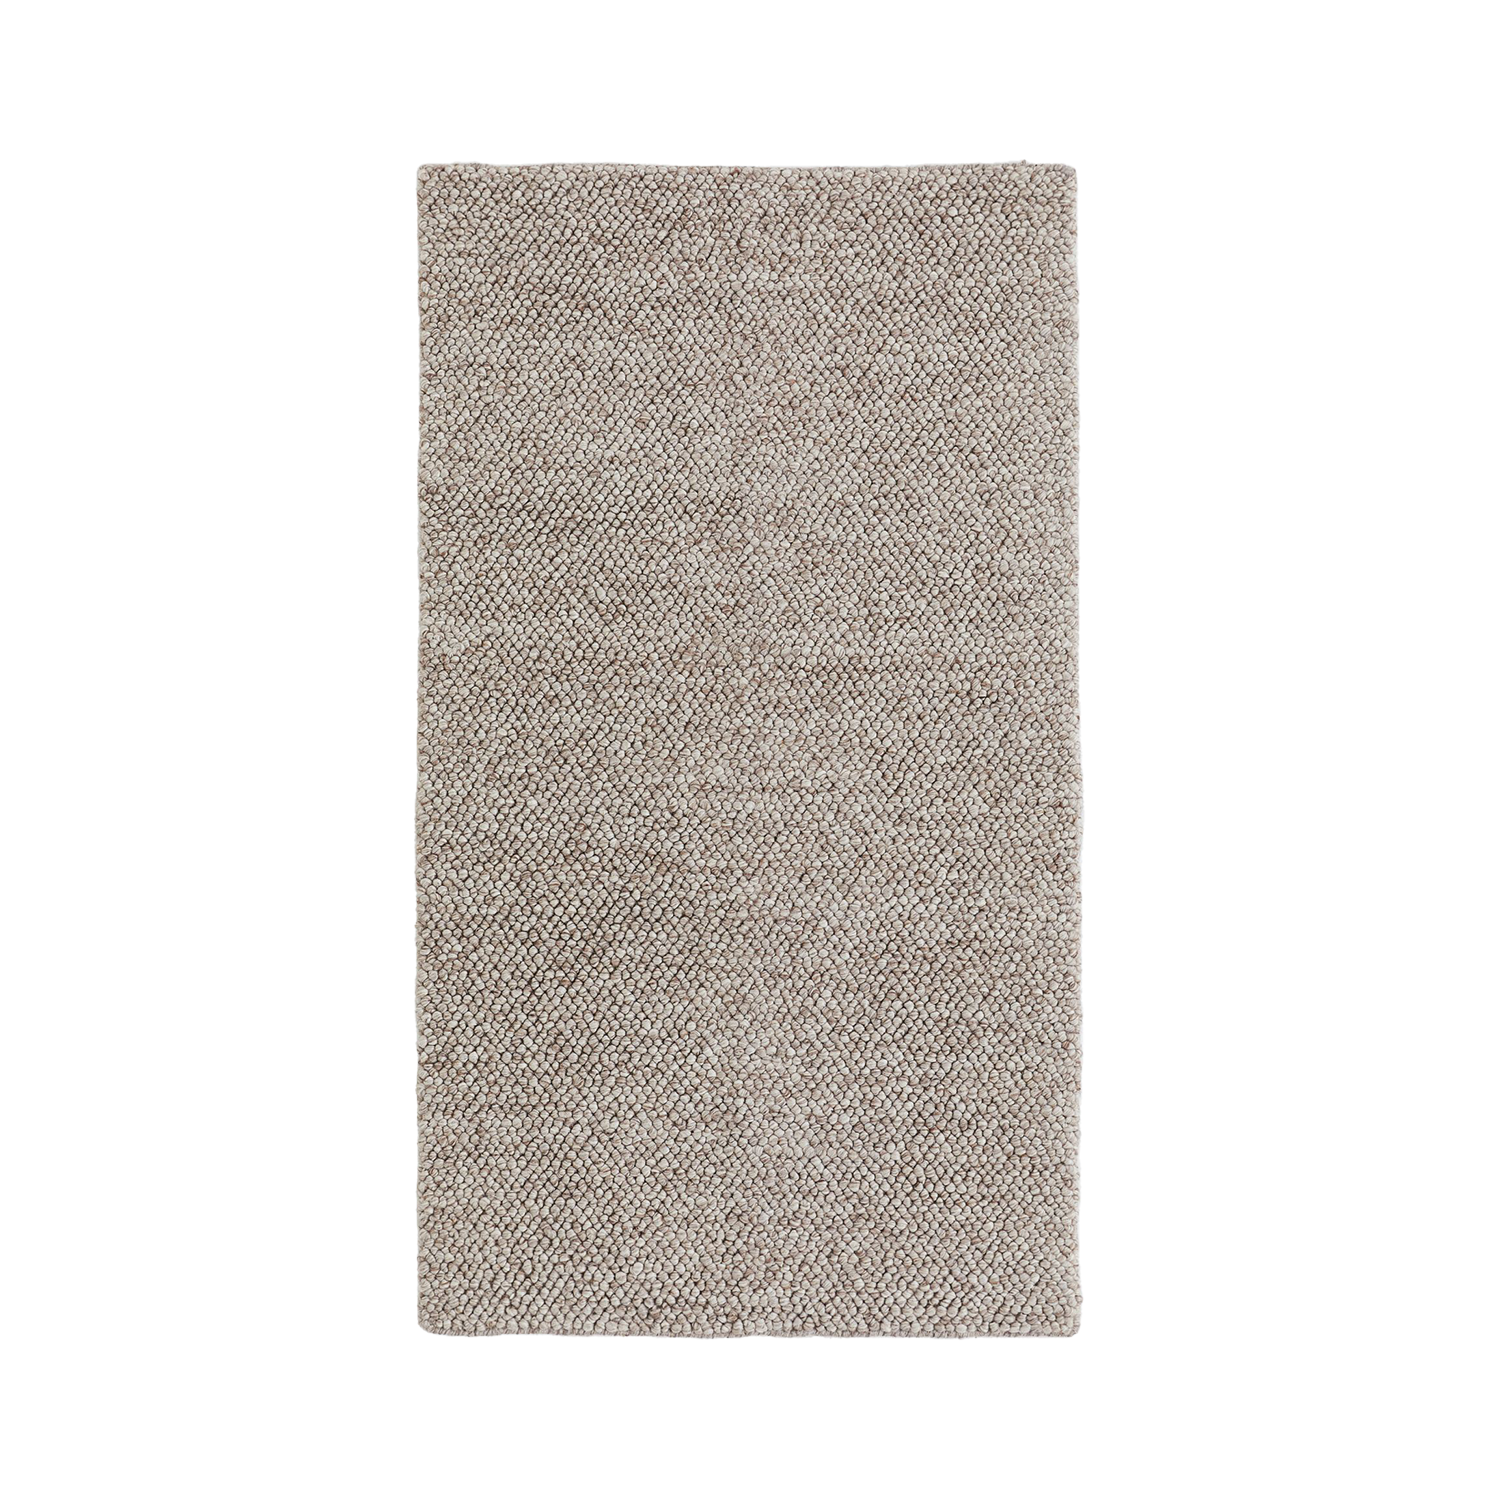 H&M Home Wool Rug in Gray.